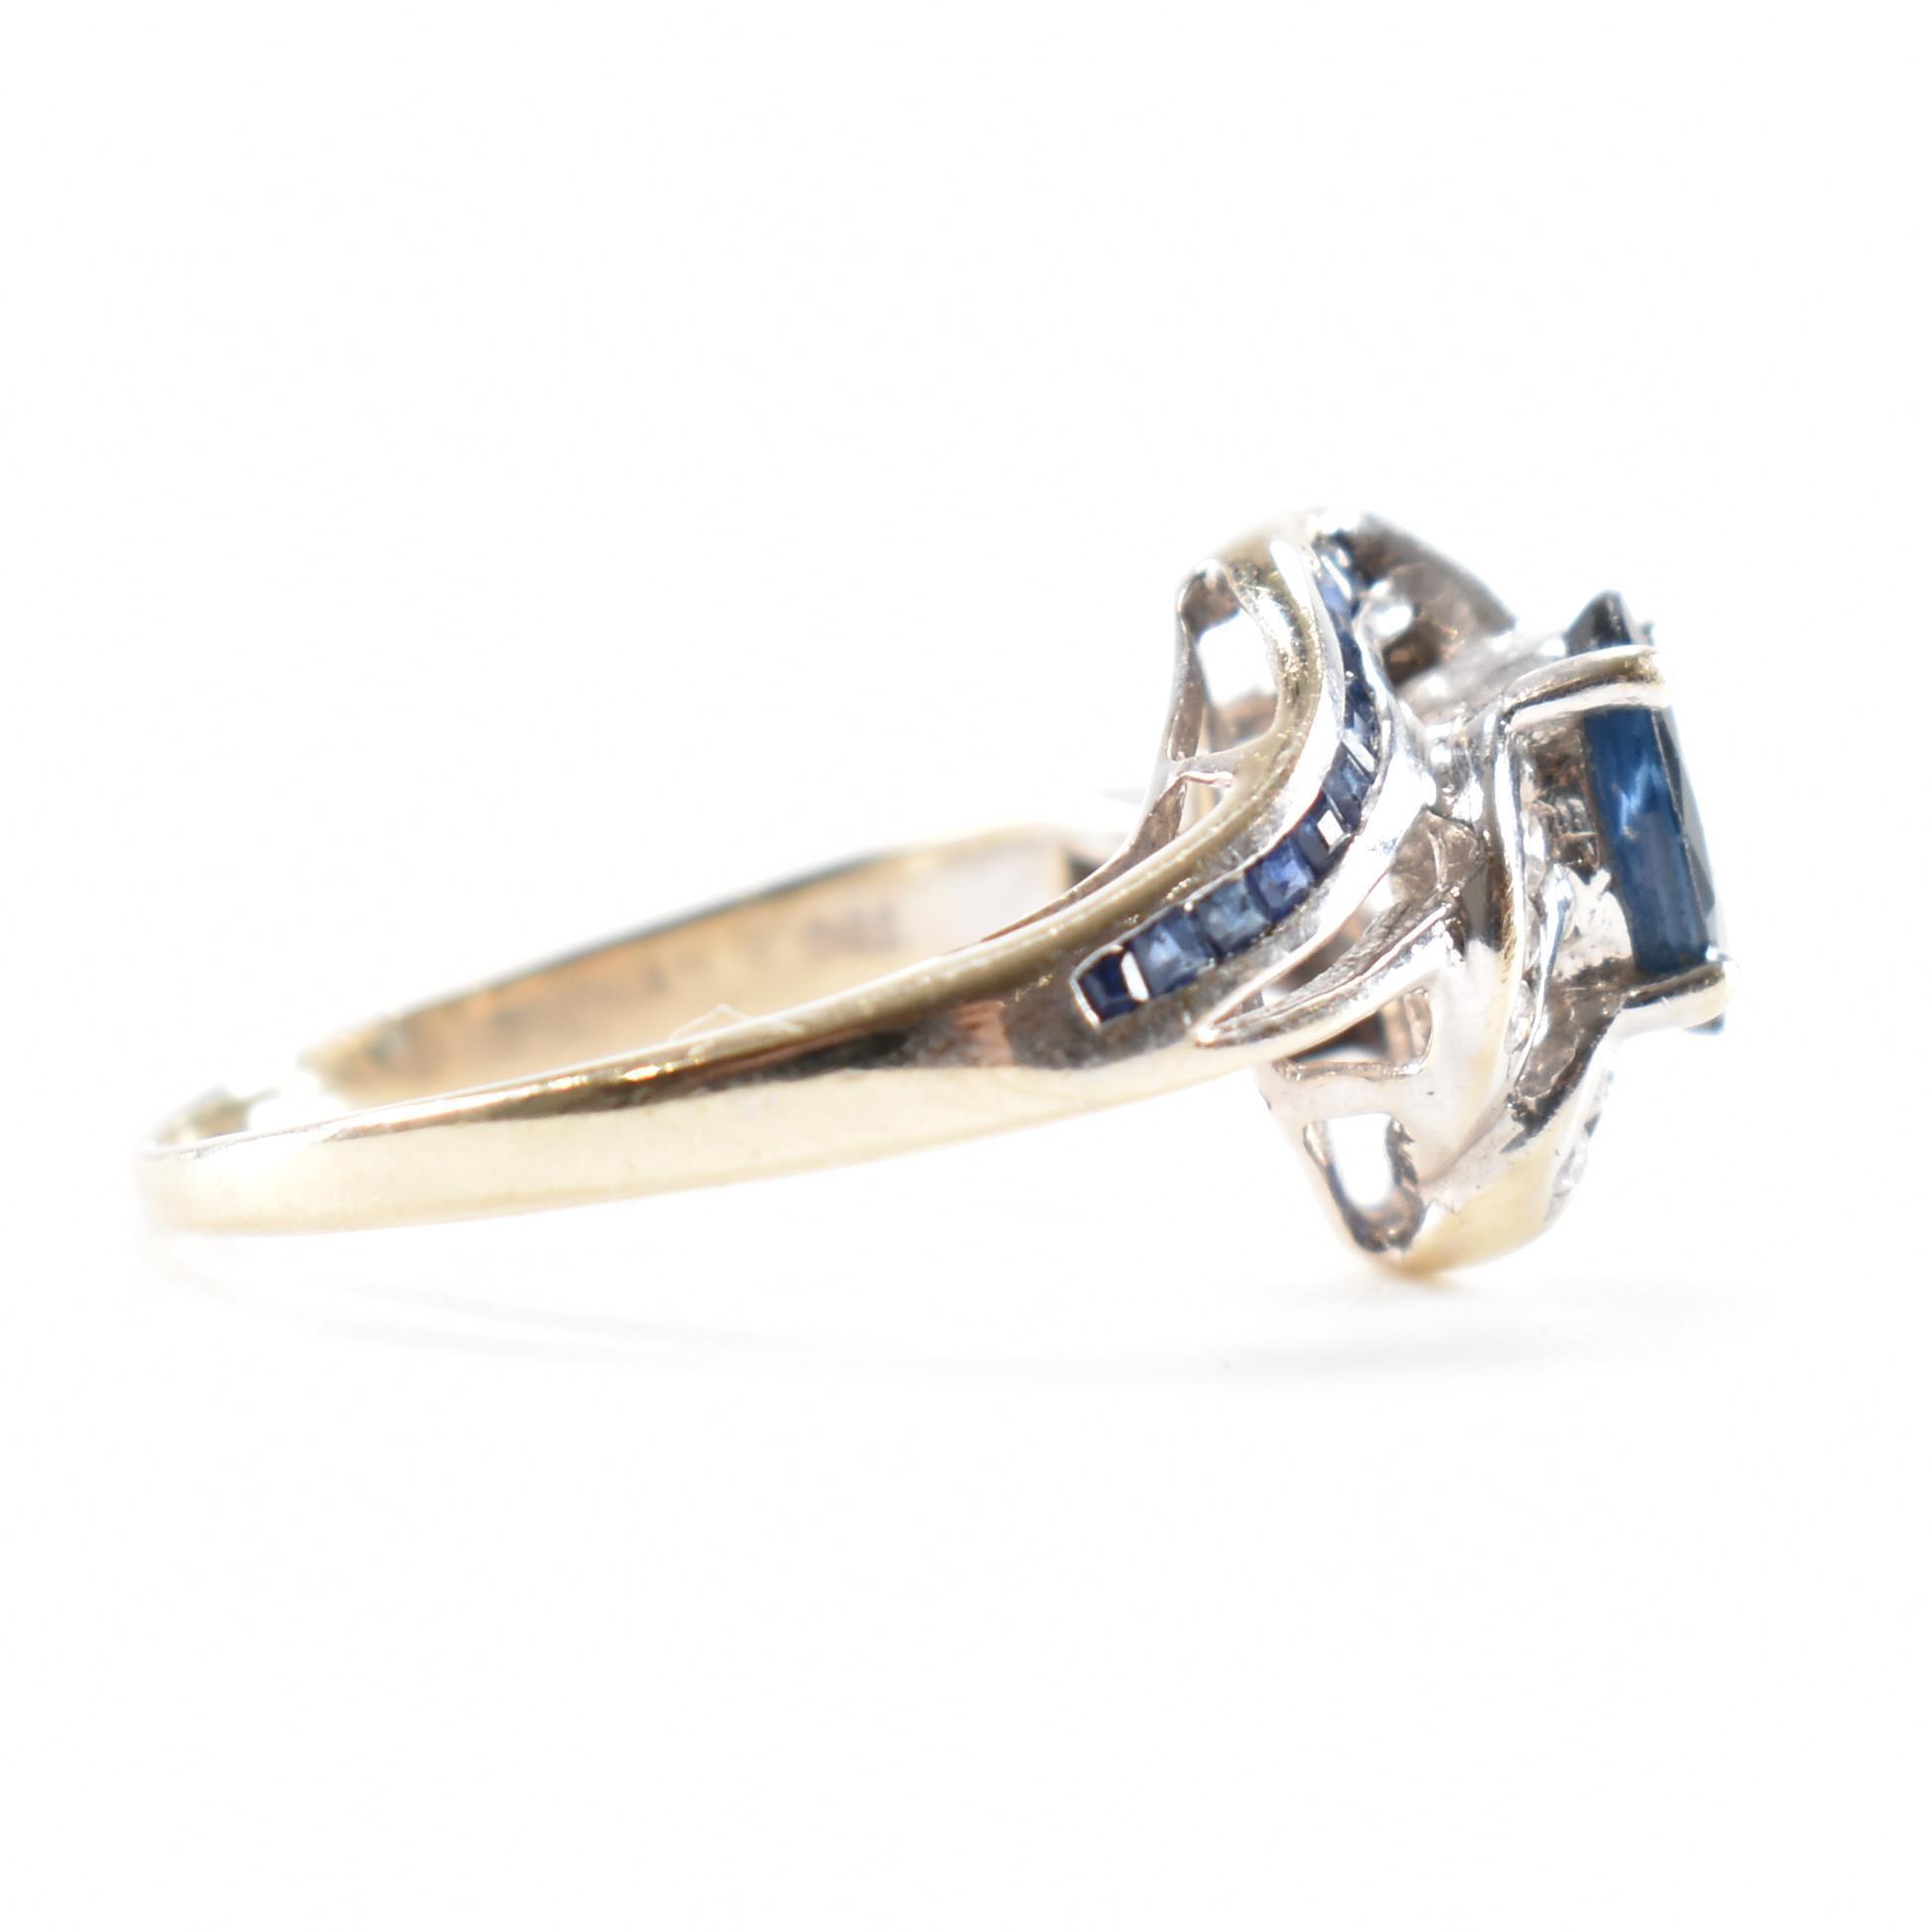 WHITE GOLD SAPPHIRE & DIAMOND CROSSOVER RING - Image 6 of 11